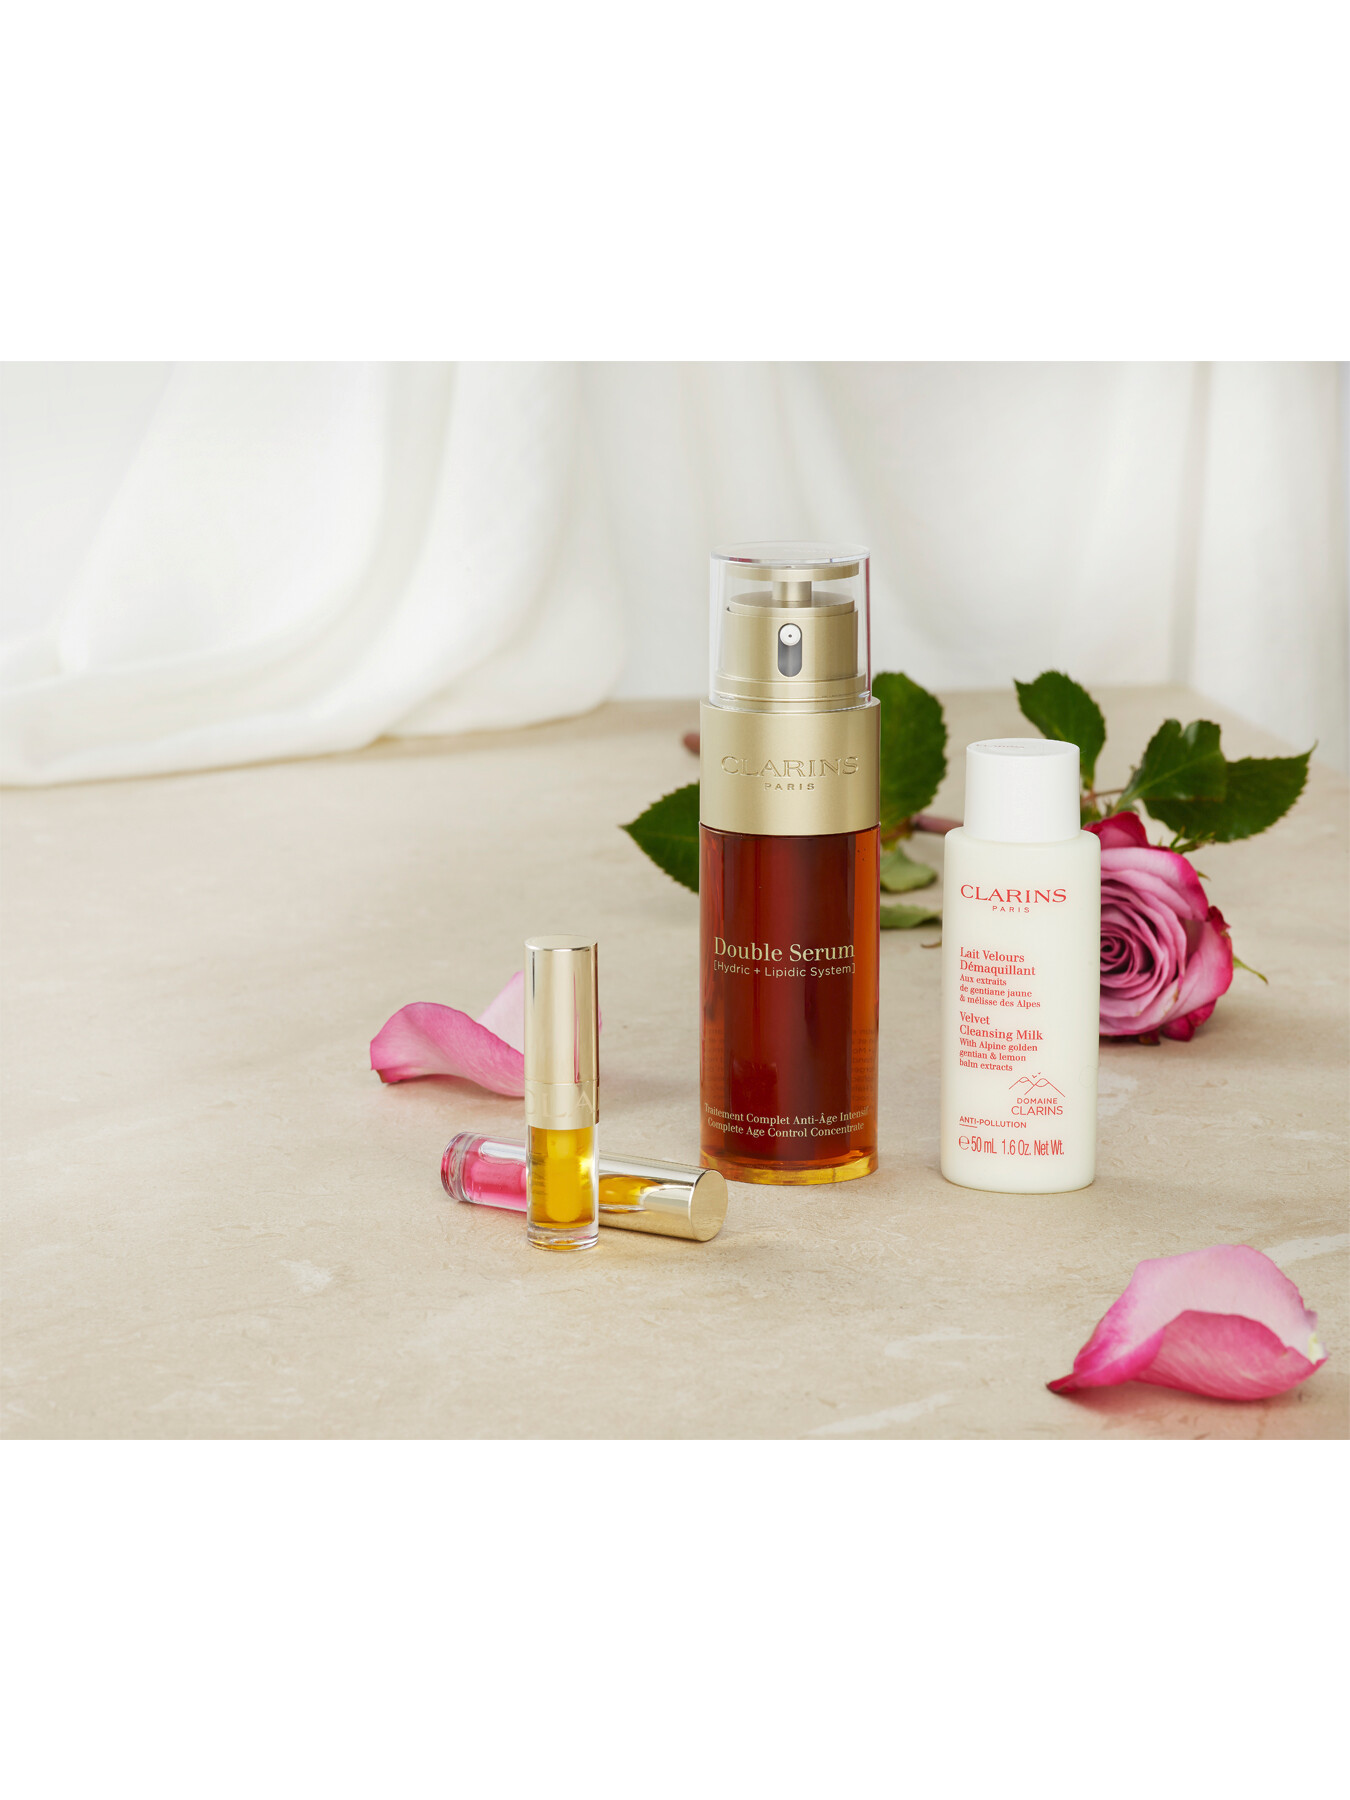 Eau Extraordinaire inner strength body care routine | CLARINS®